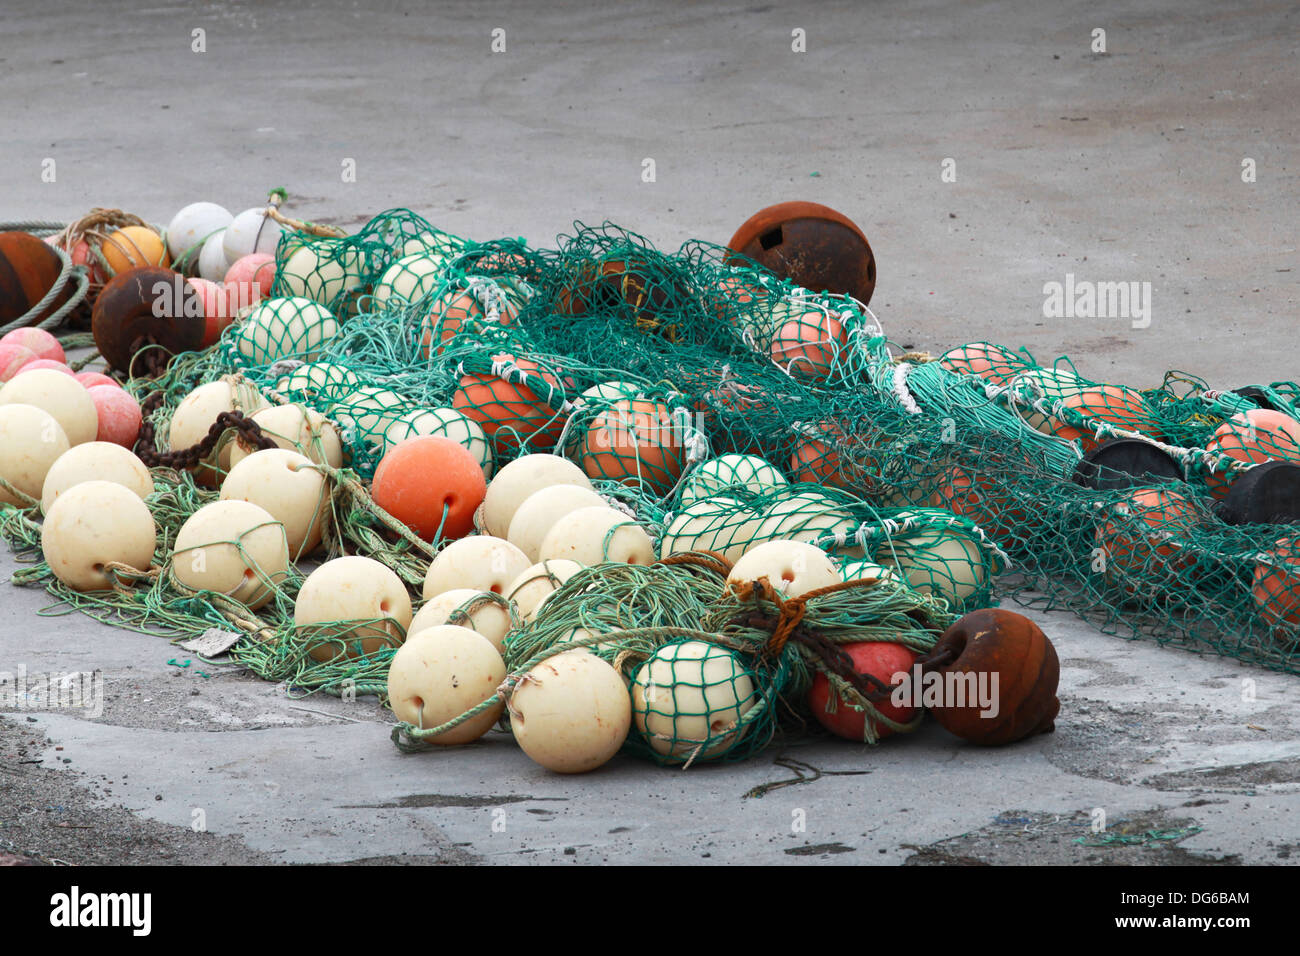 Green fishing net with spherical buoys lay on the coast Stock Photo